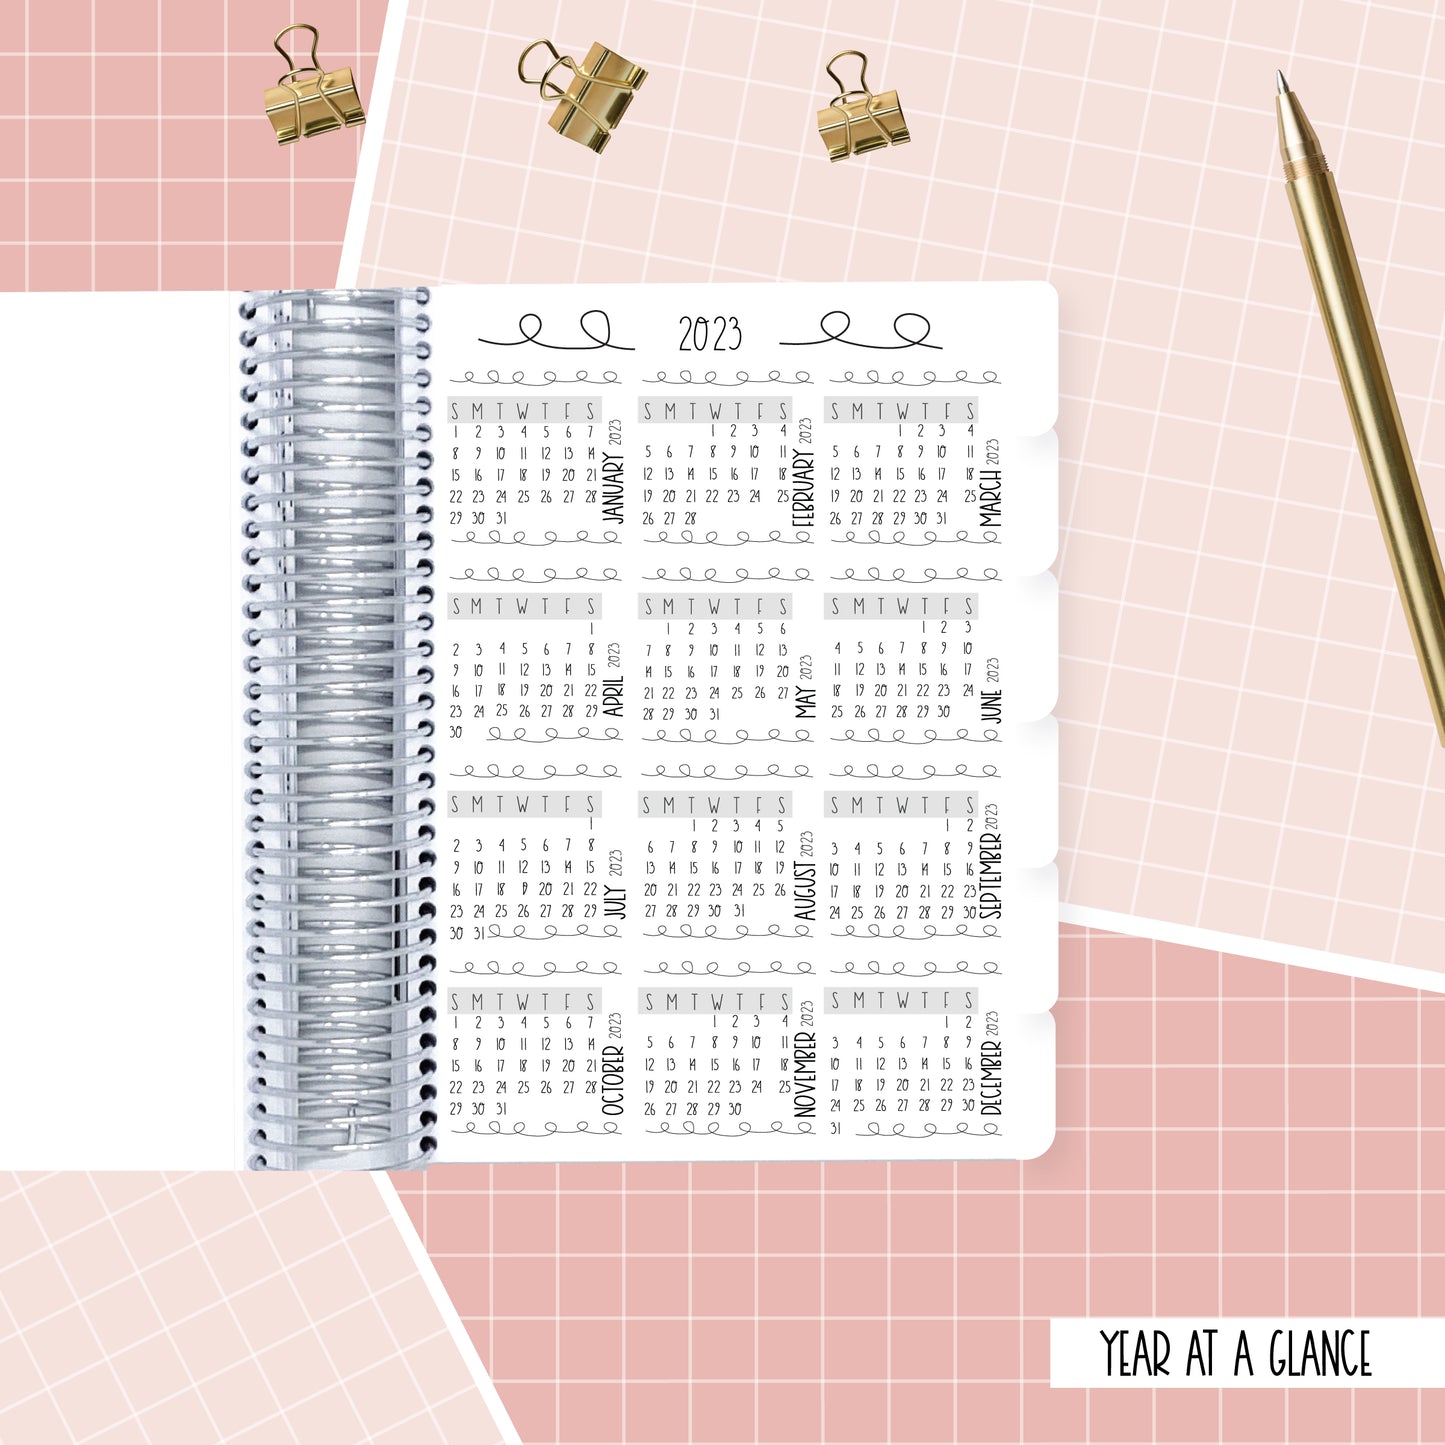 Leopard Swirls - B6 Daily Be Productive Planner